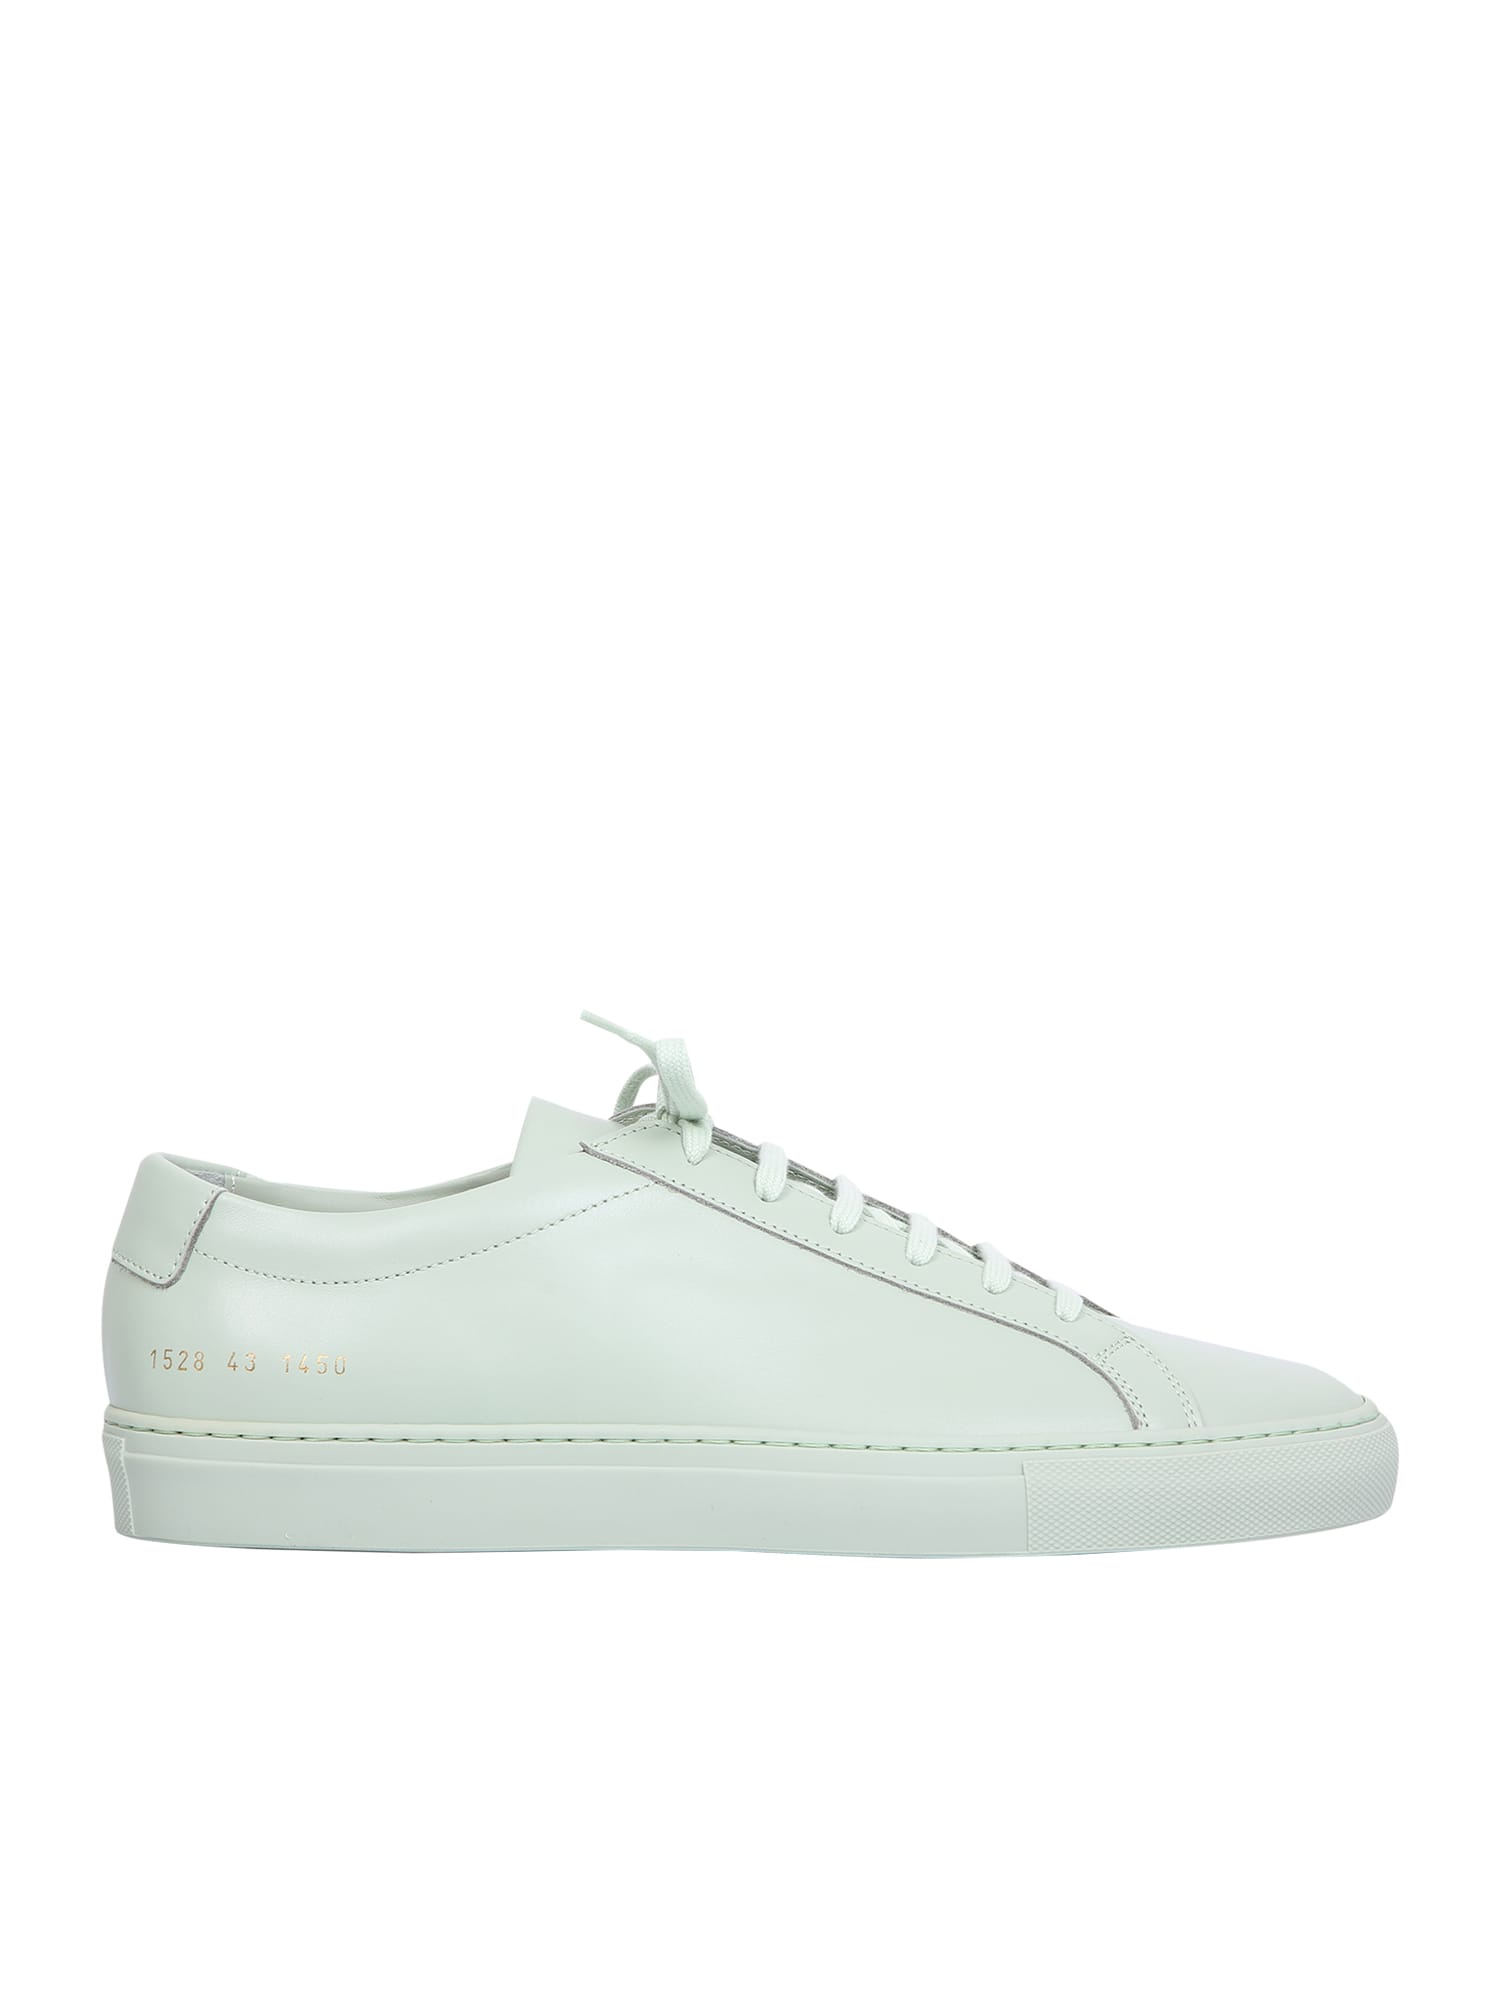 Common Projects Achilles Original Sneakers